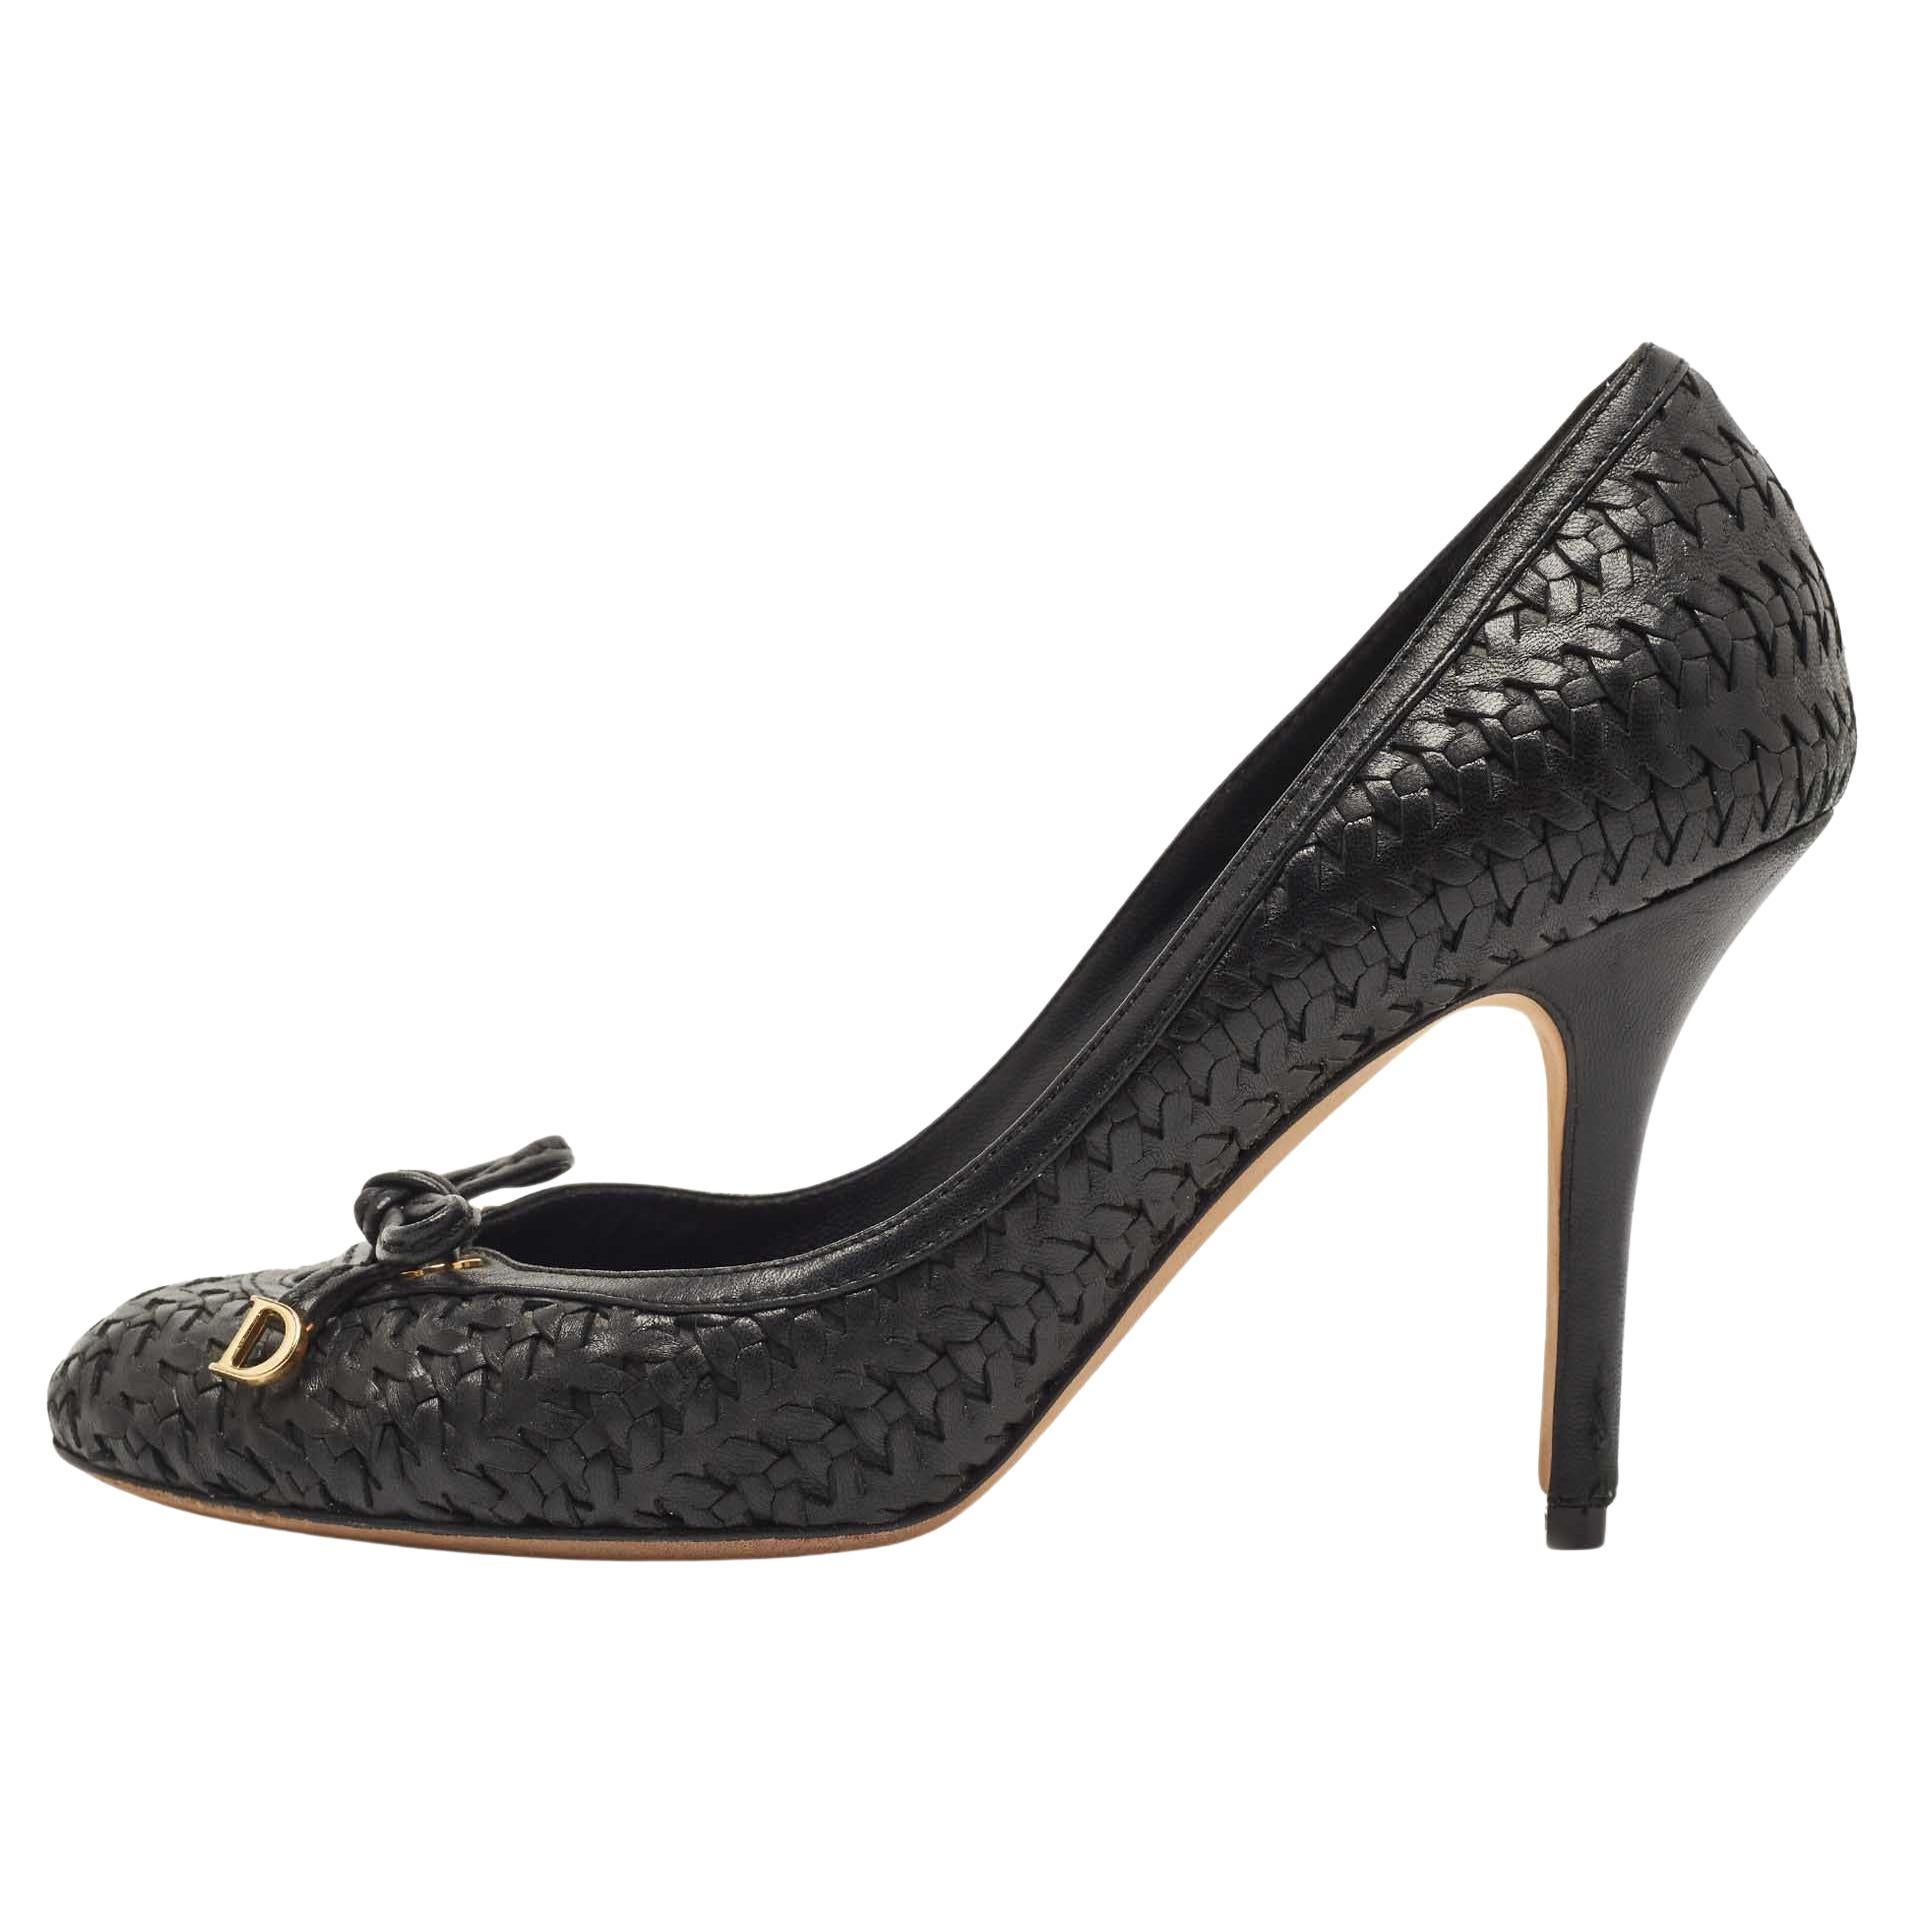 Dior Black Woven Leather CD Charm Bow Pumps Size 38.5